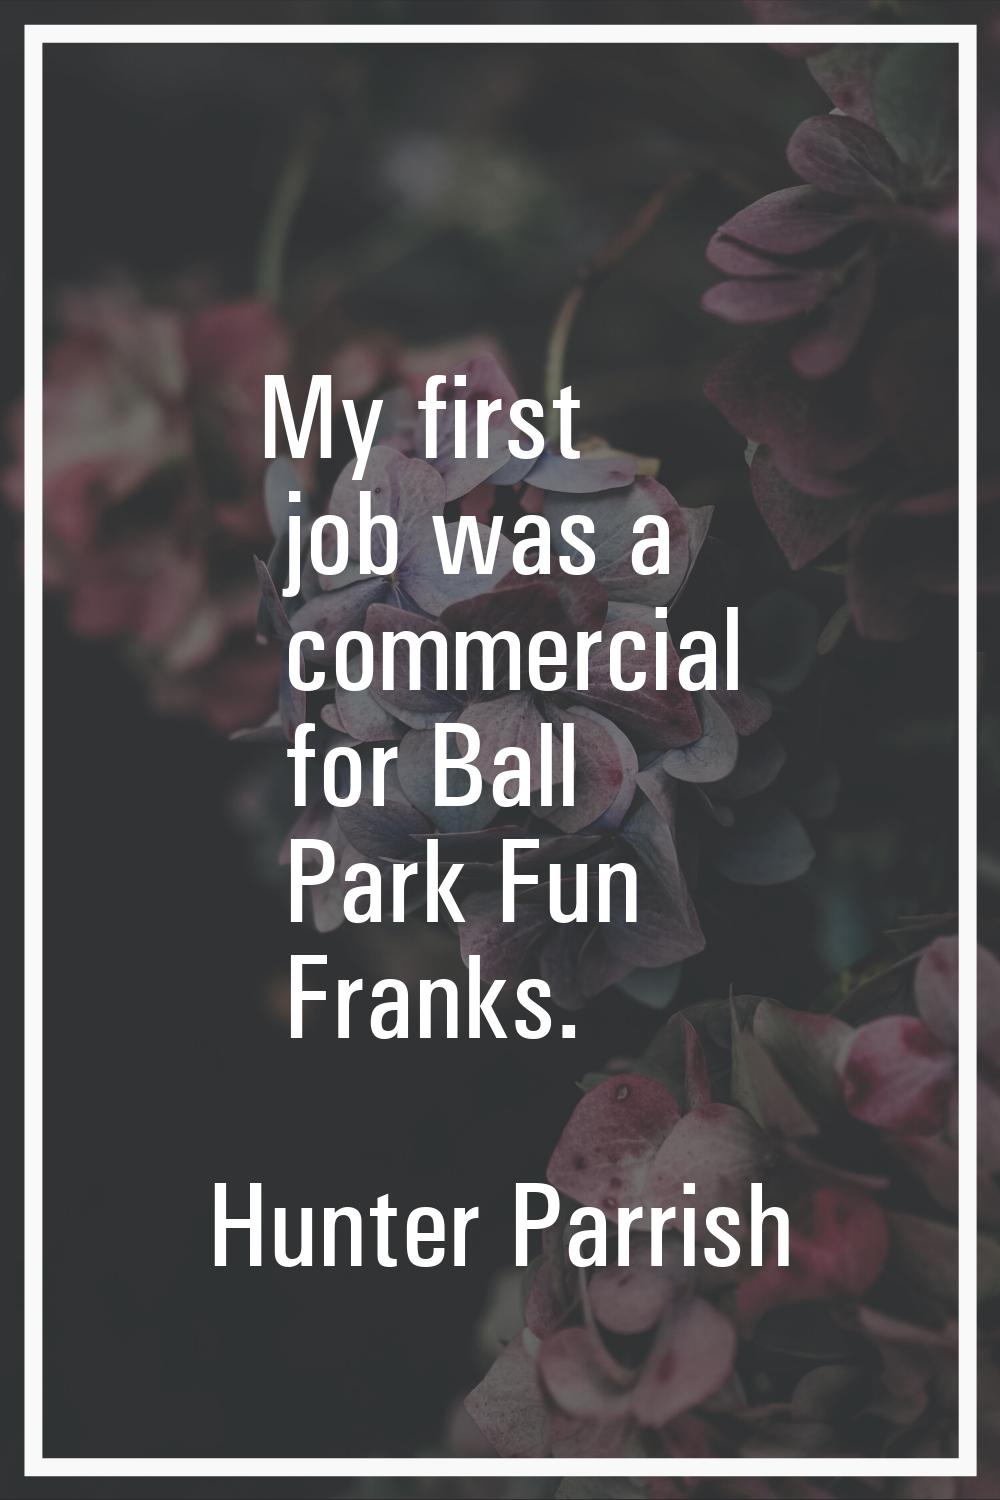 My first job was a commercial for Ball Park Fun Franks.